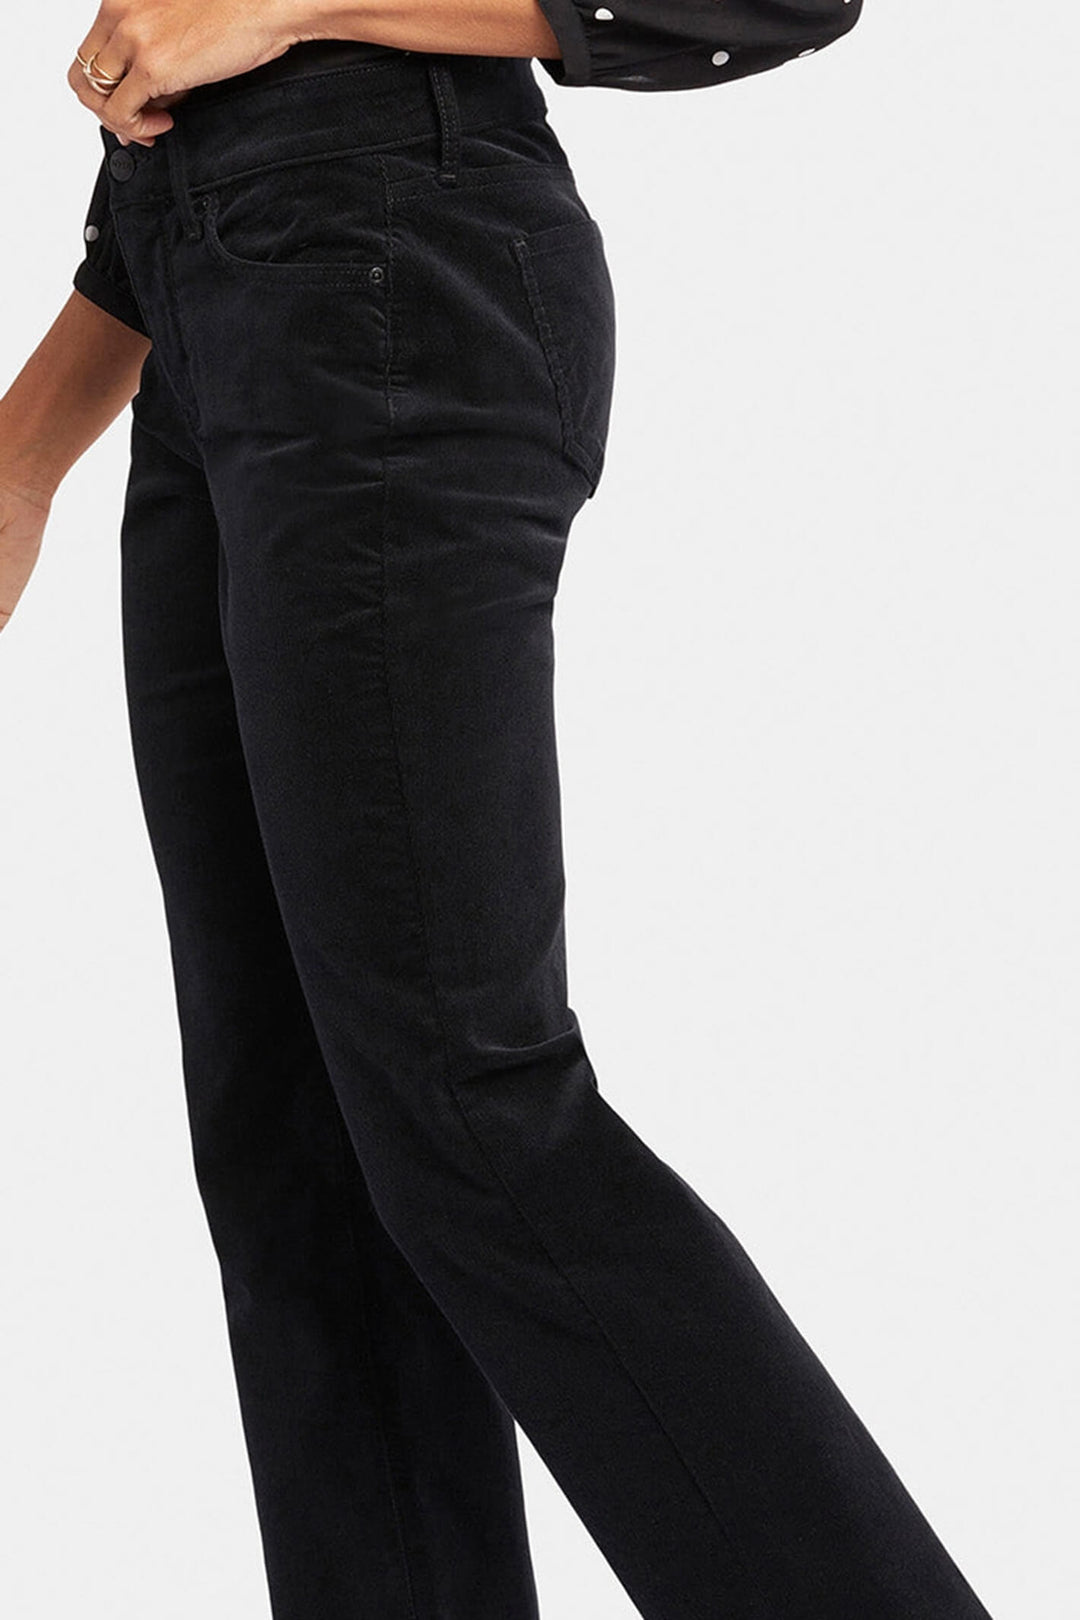 NYDJ Marilyn MBCRMS2299 Black Straight Corduroy Jeans - Shirley Allum Boutique